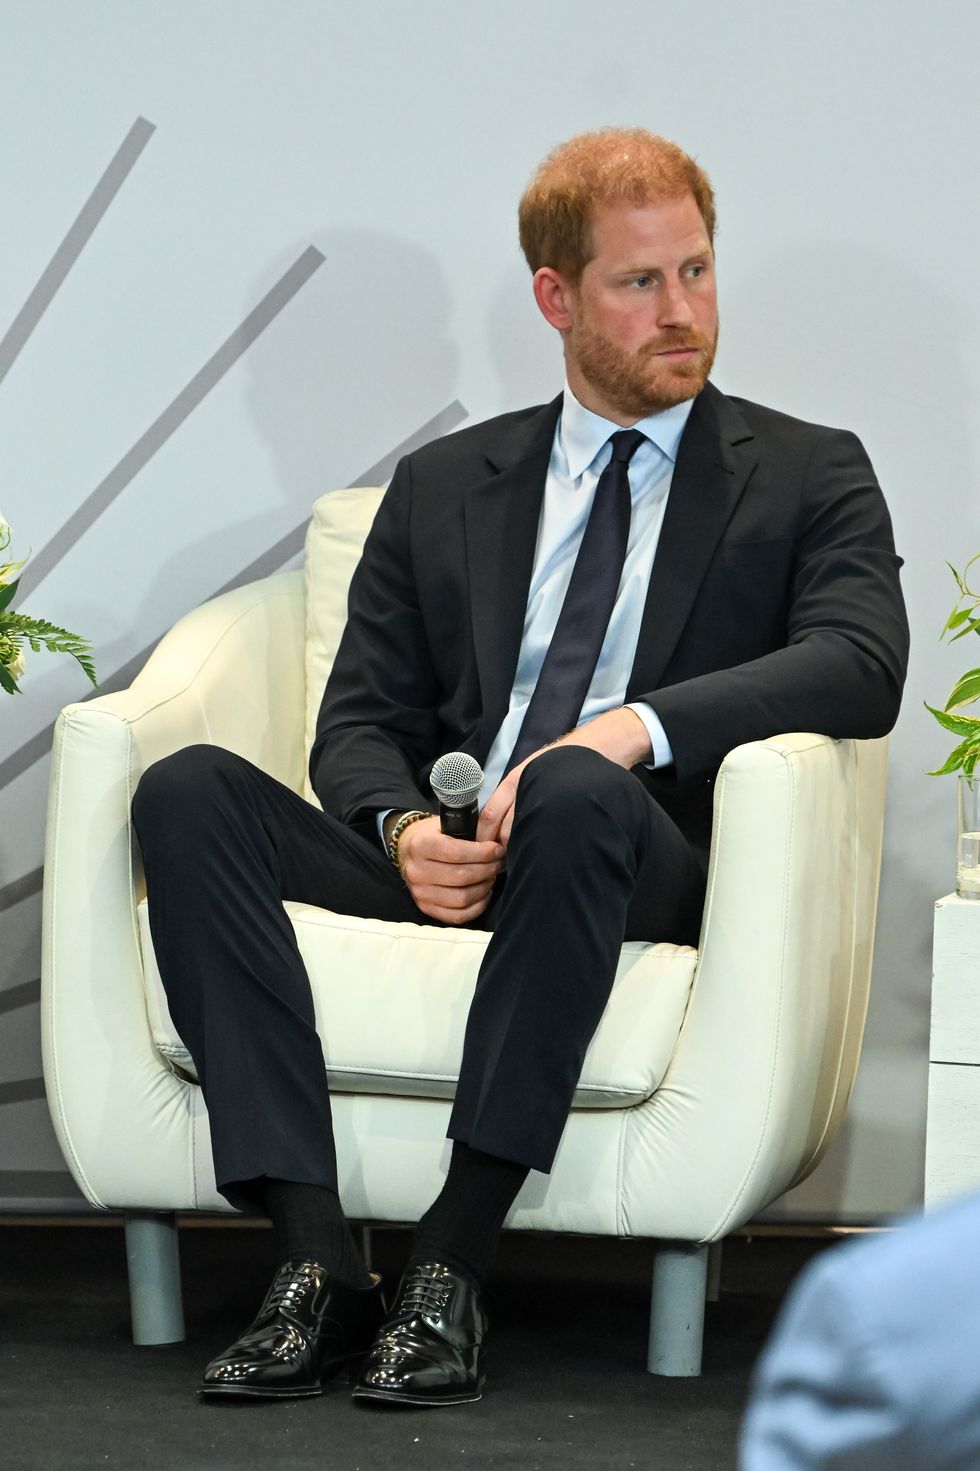 Prince Harry could find himself in hot water even if Biden refuses to ...